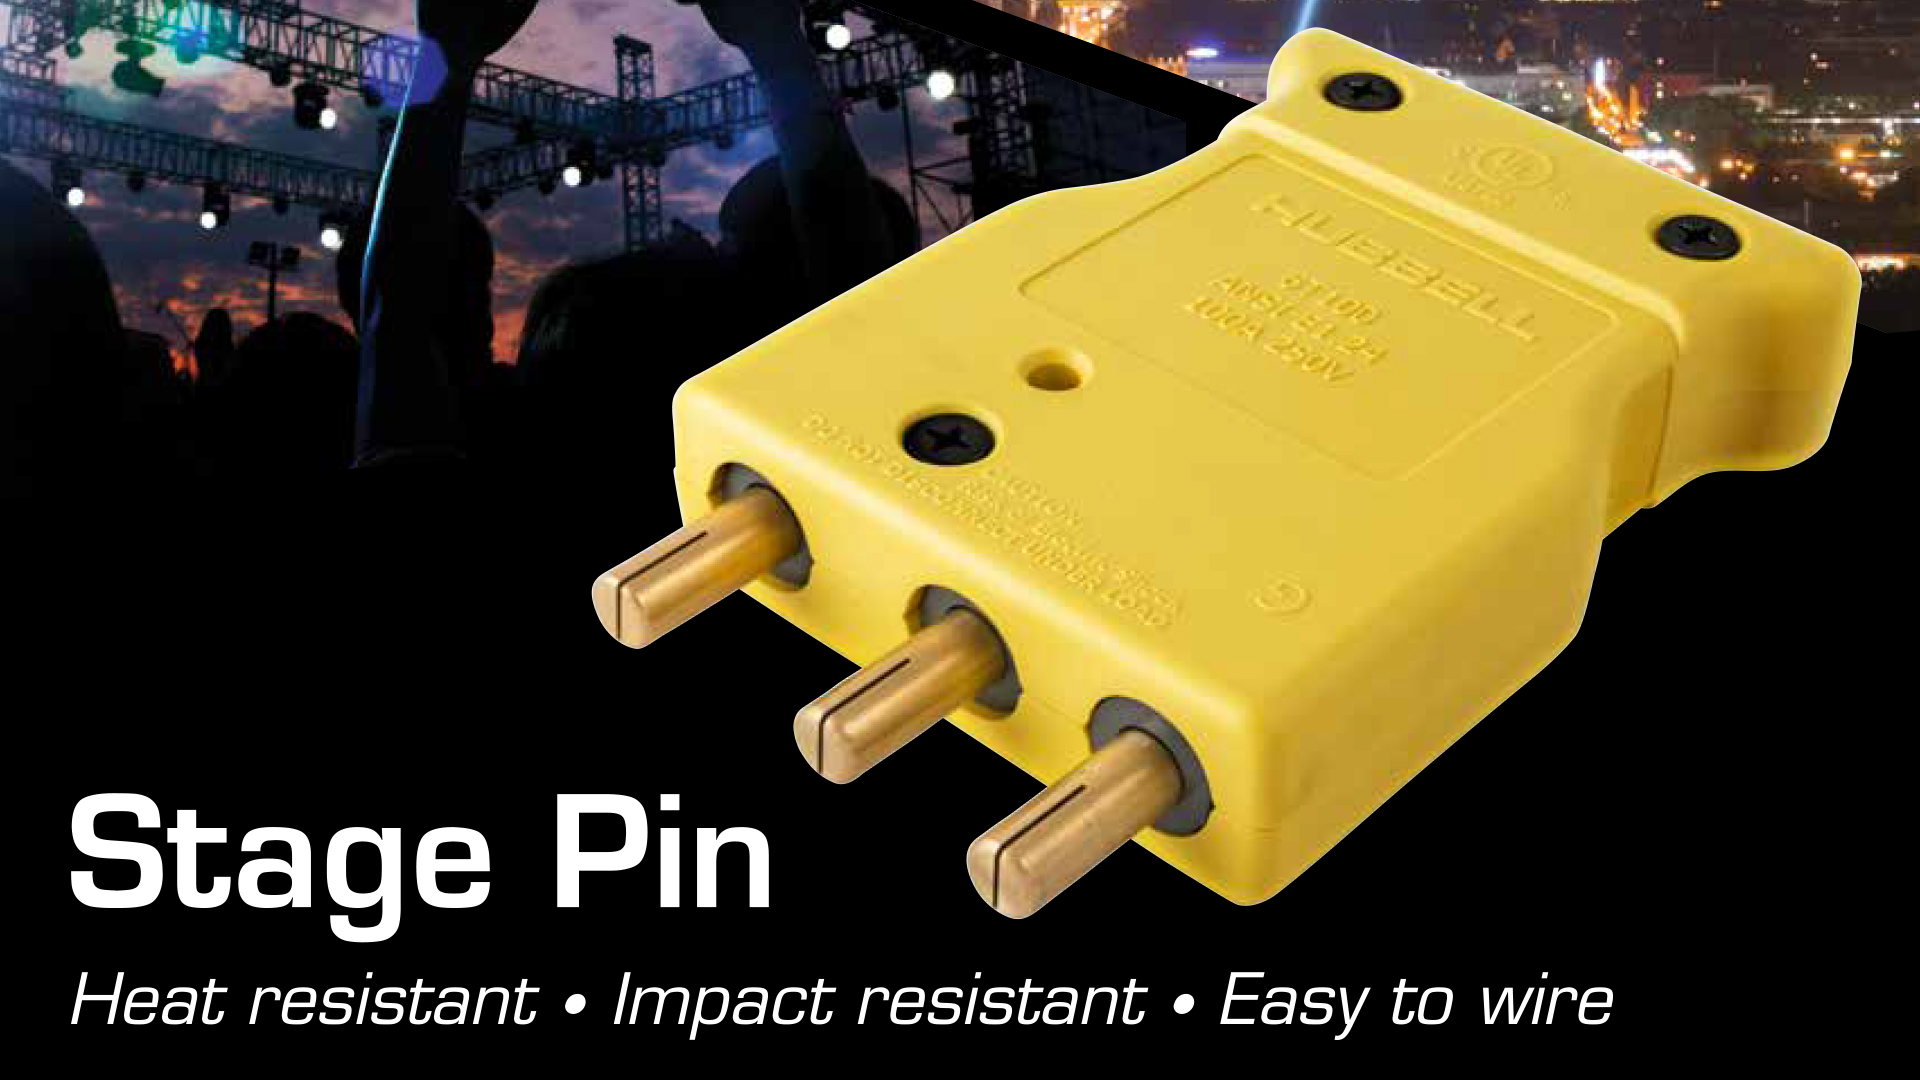 New Stage Pin Devices Designed Specifically for the Harshness of the Entertainment Industry